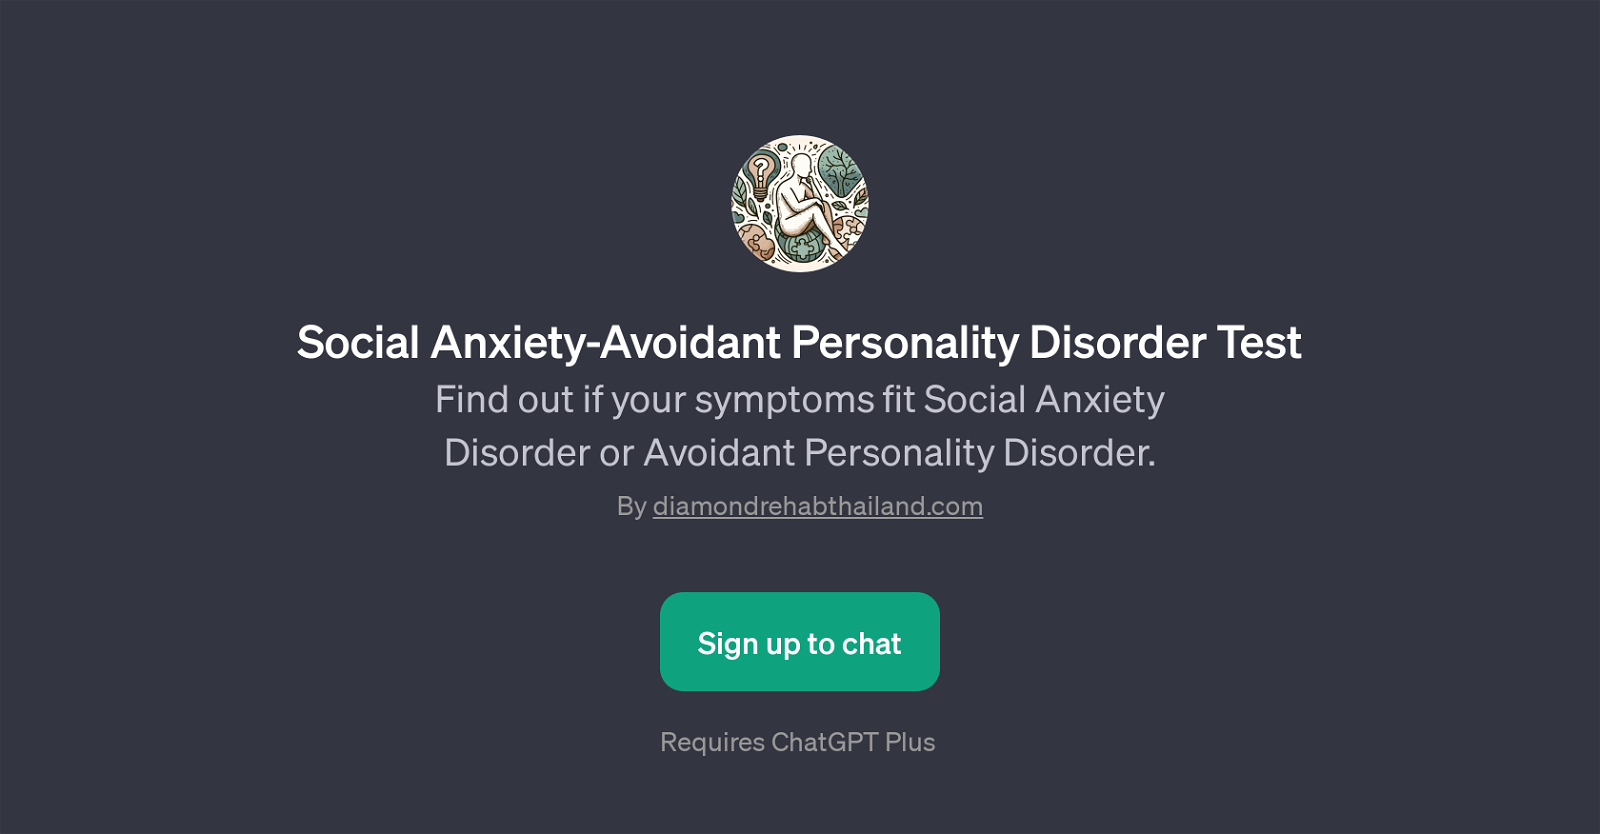 Social Anxiety-Avoidant Personality Disorder Test website